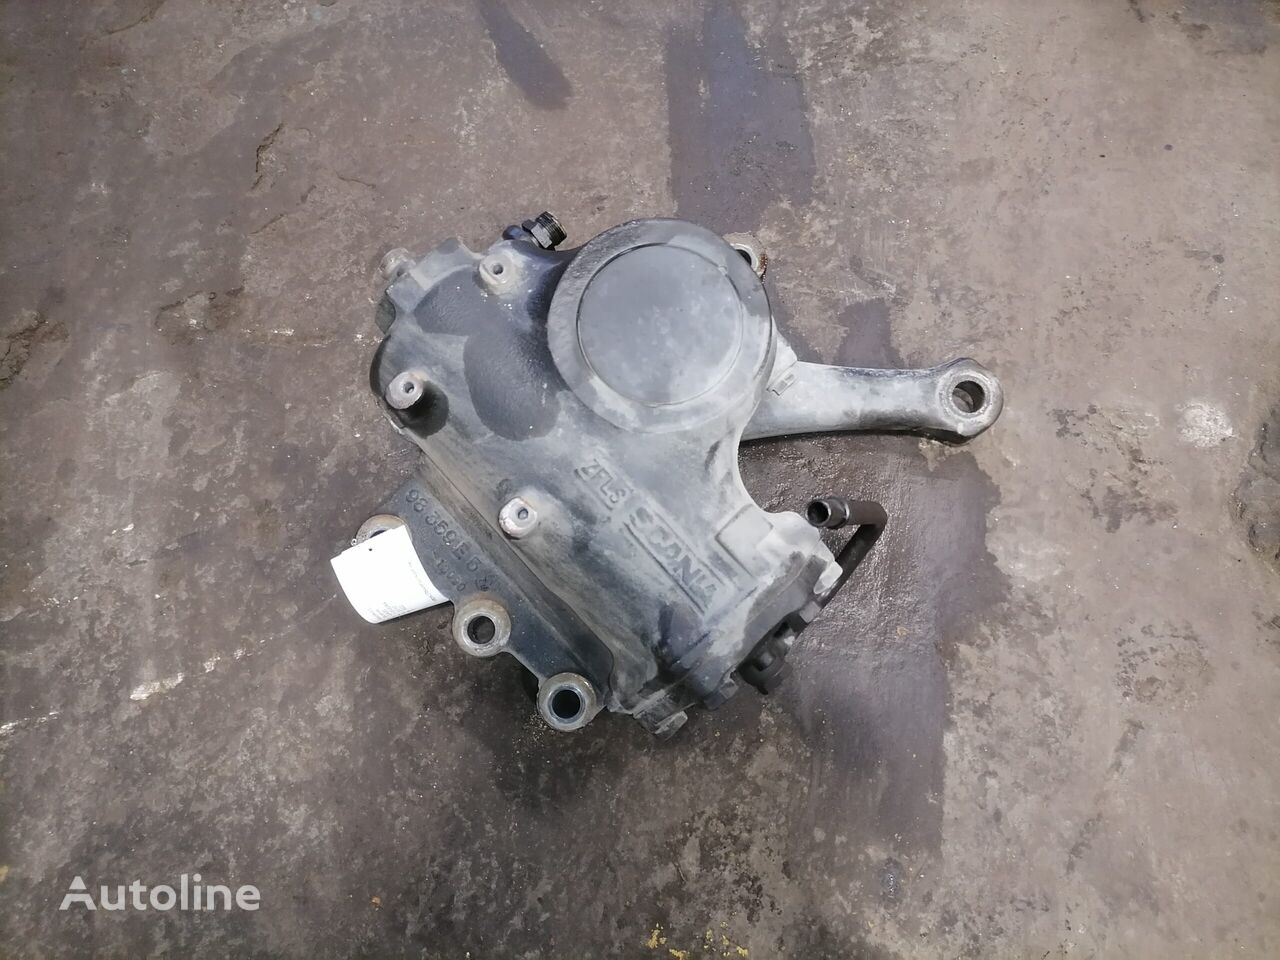 Scania Steering box 575014 steering gear for Scania G400 truck tractor